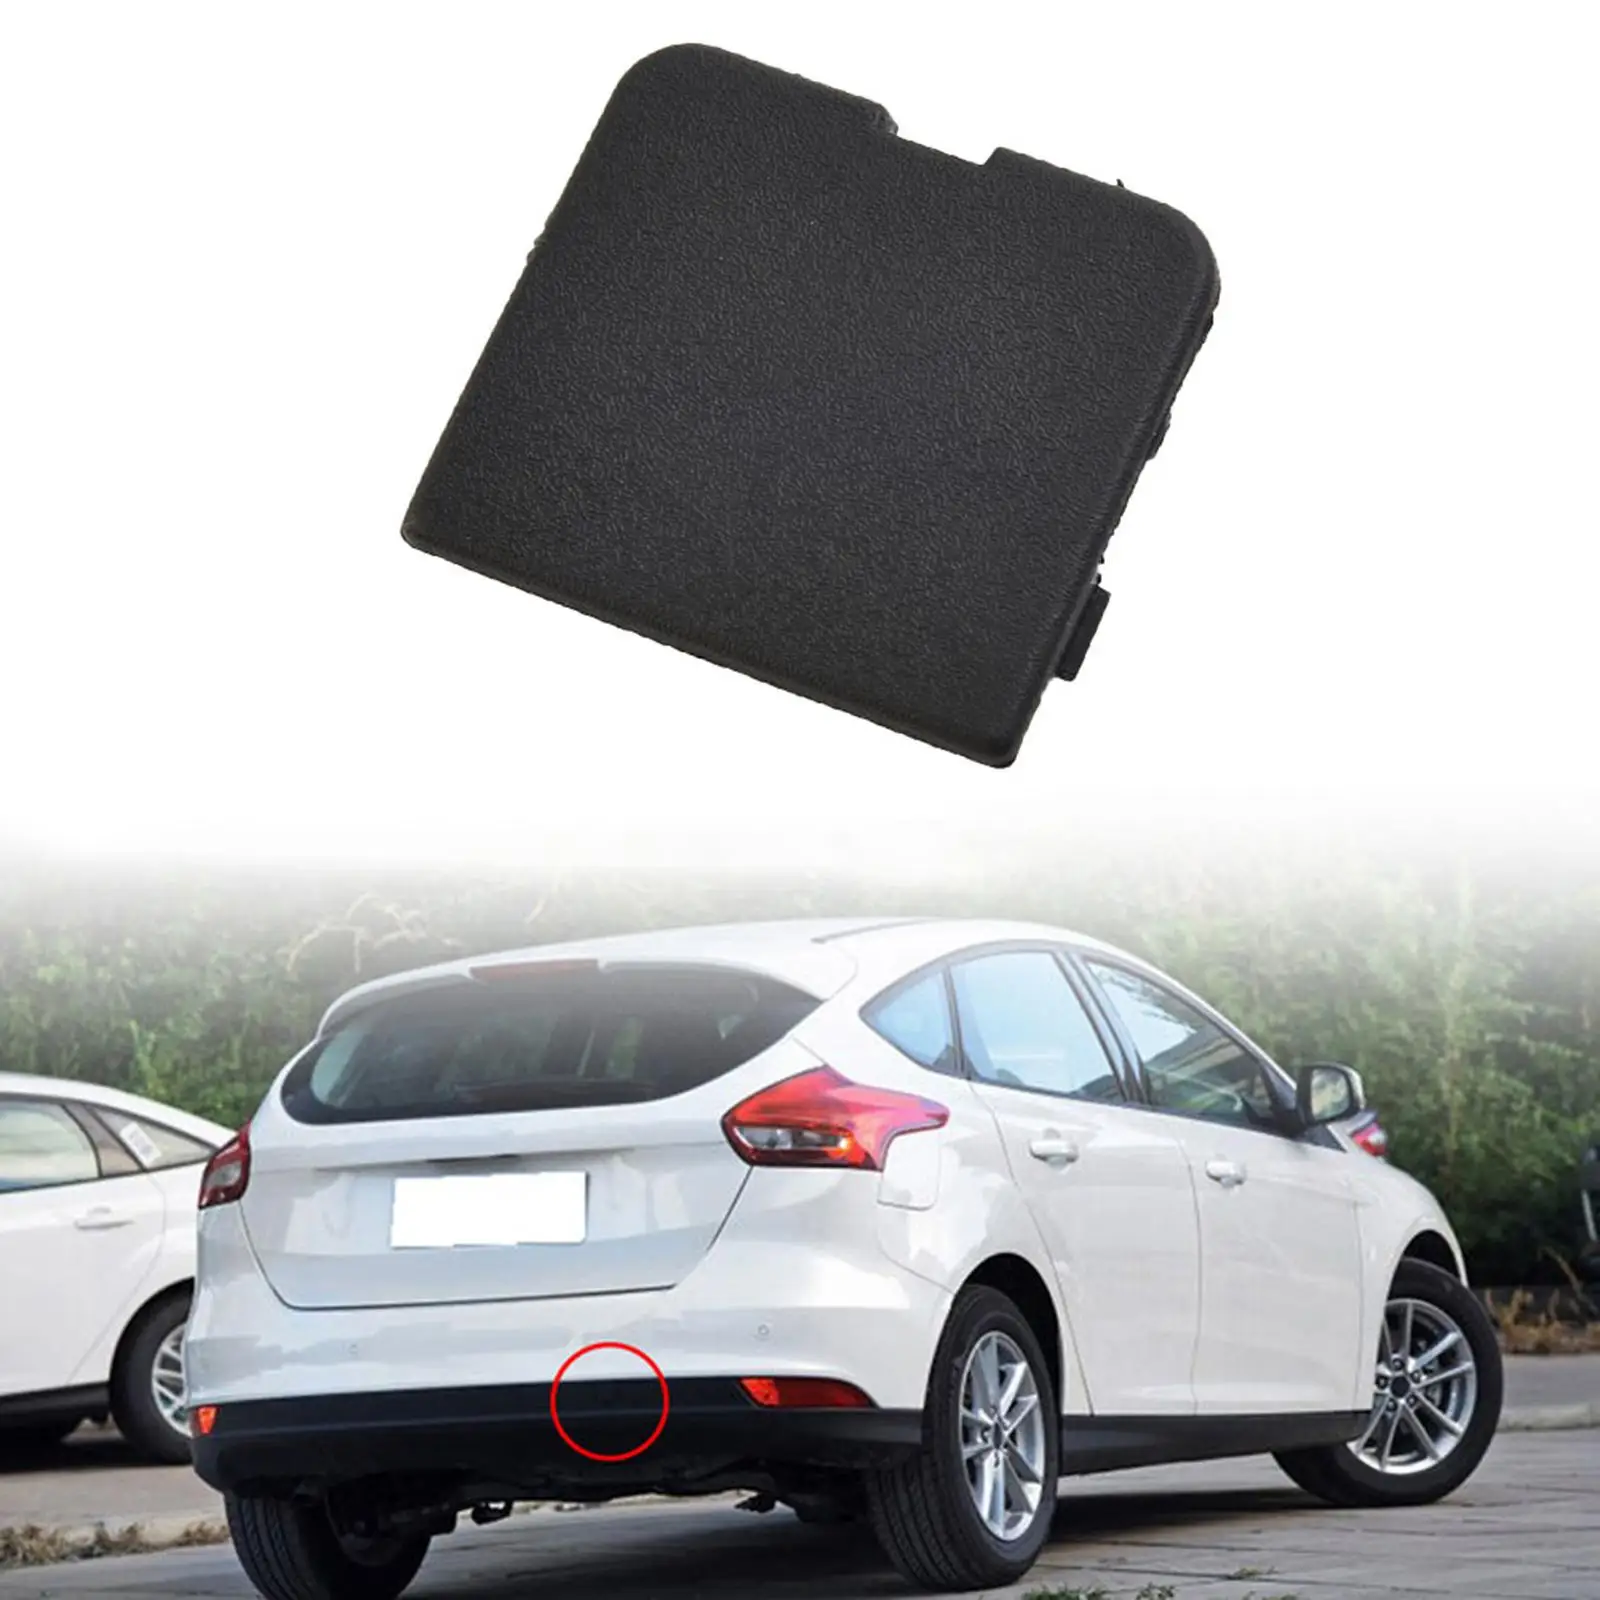 Car Rear Bumper Tow Hook Cover Cap Spare Parts Replacement High Performance 1872237 for Ford Focus Hatchback 2015-2018